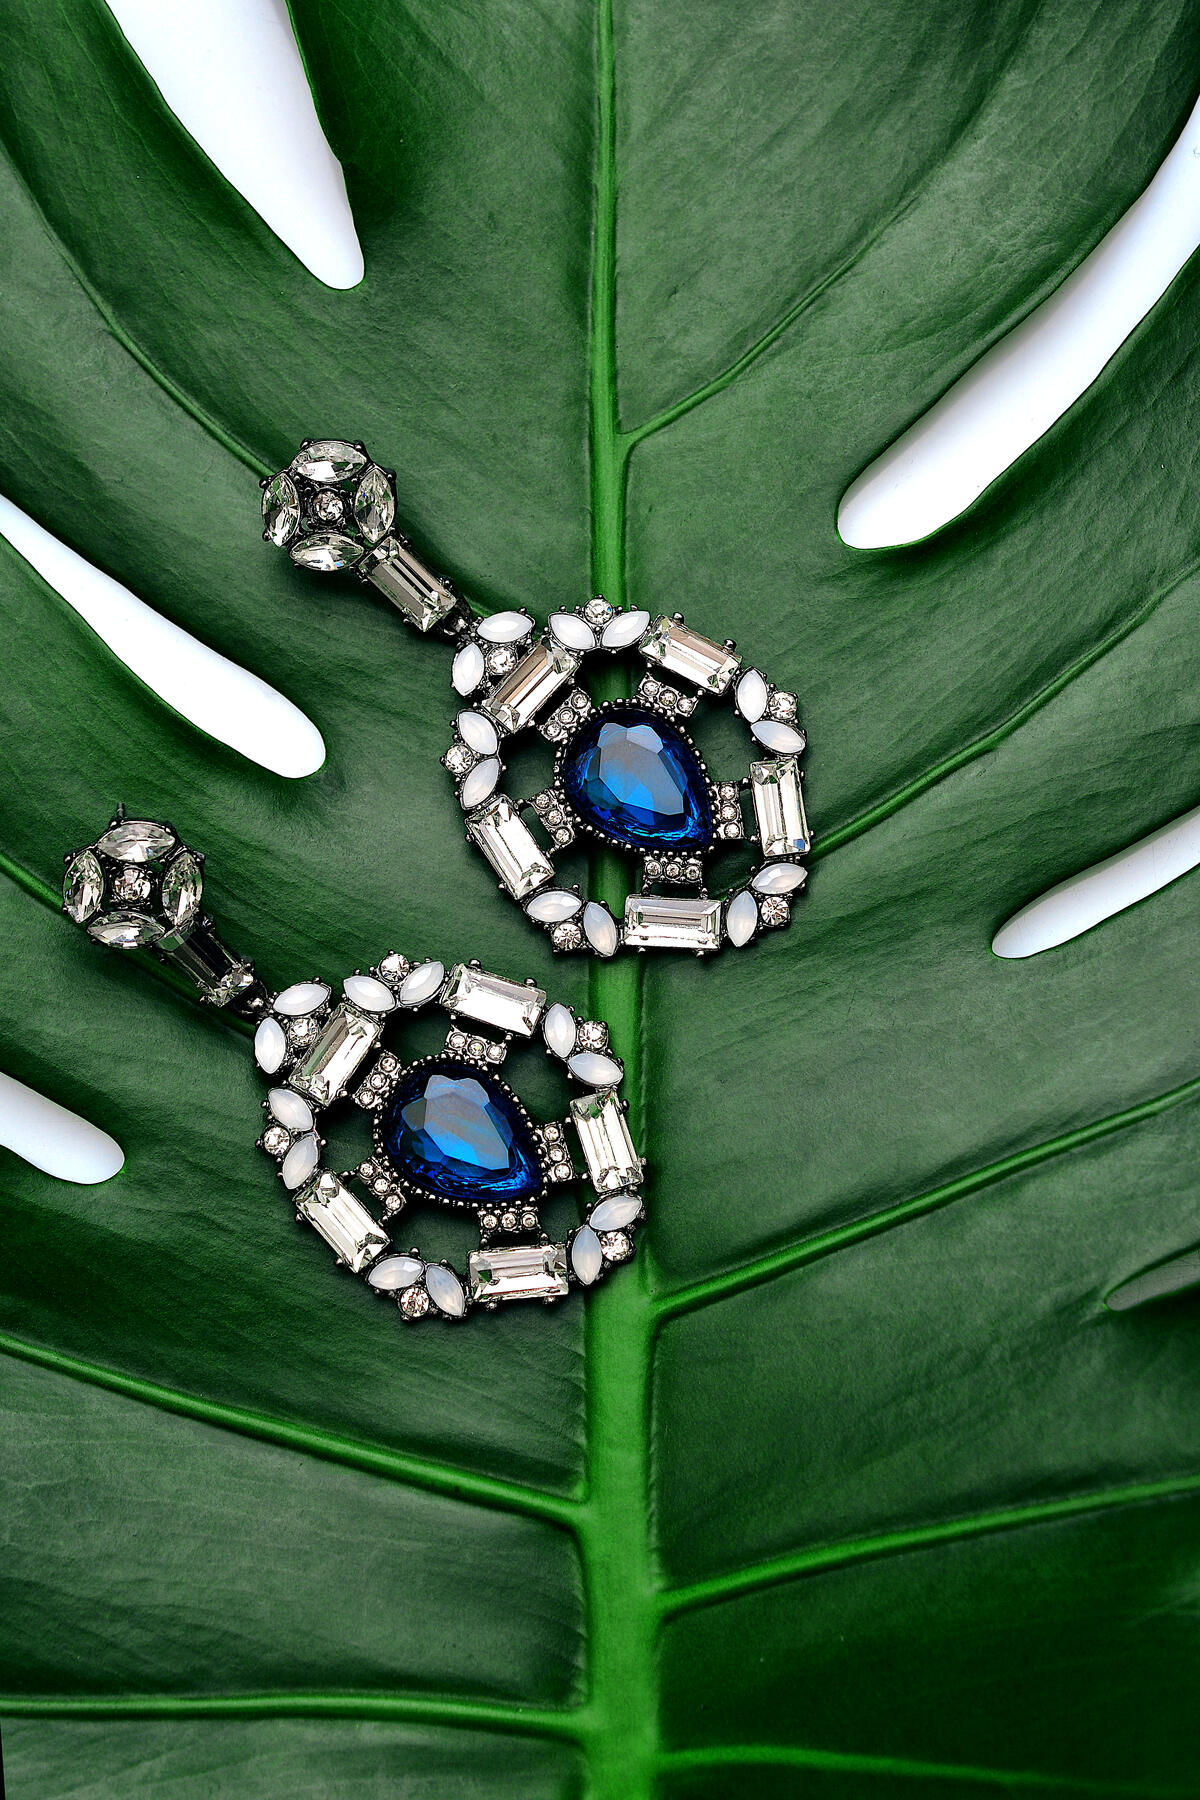 Earrings with a blue stone lie on a green leaf